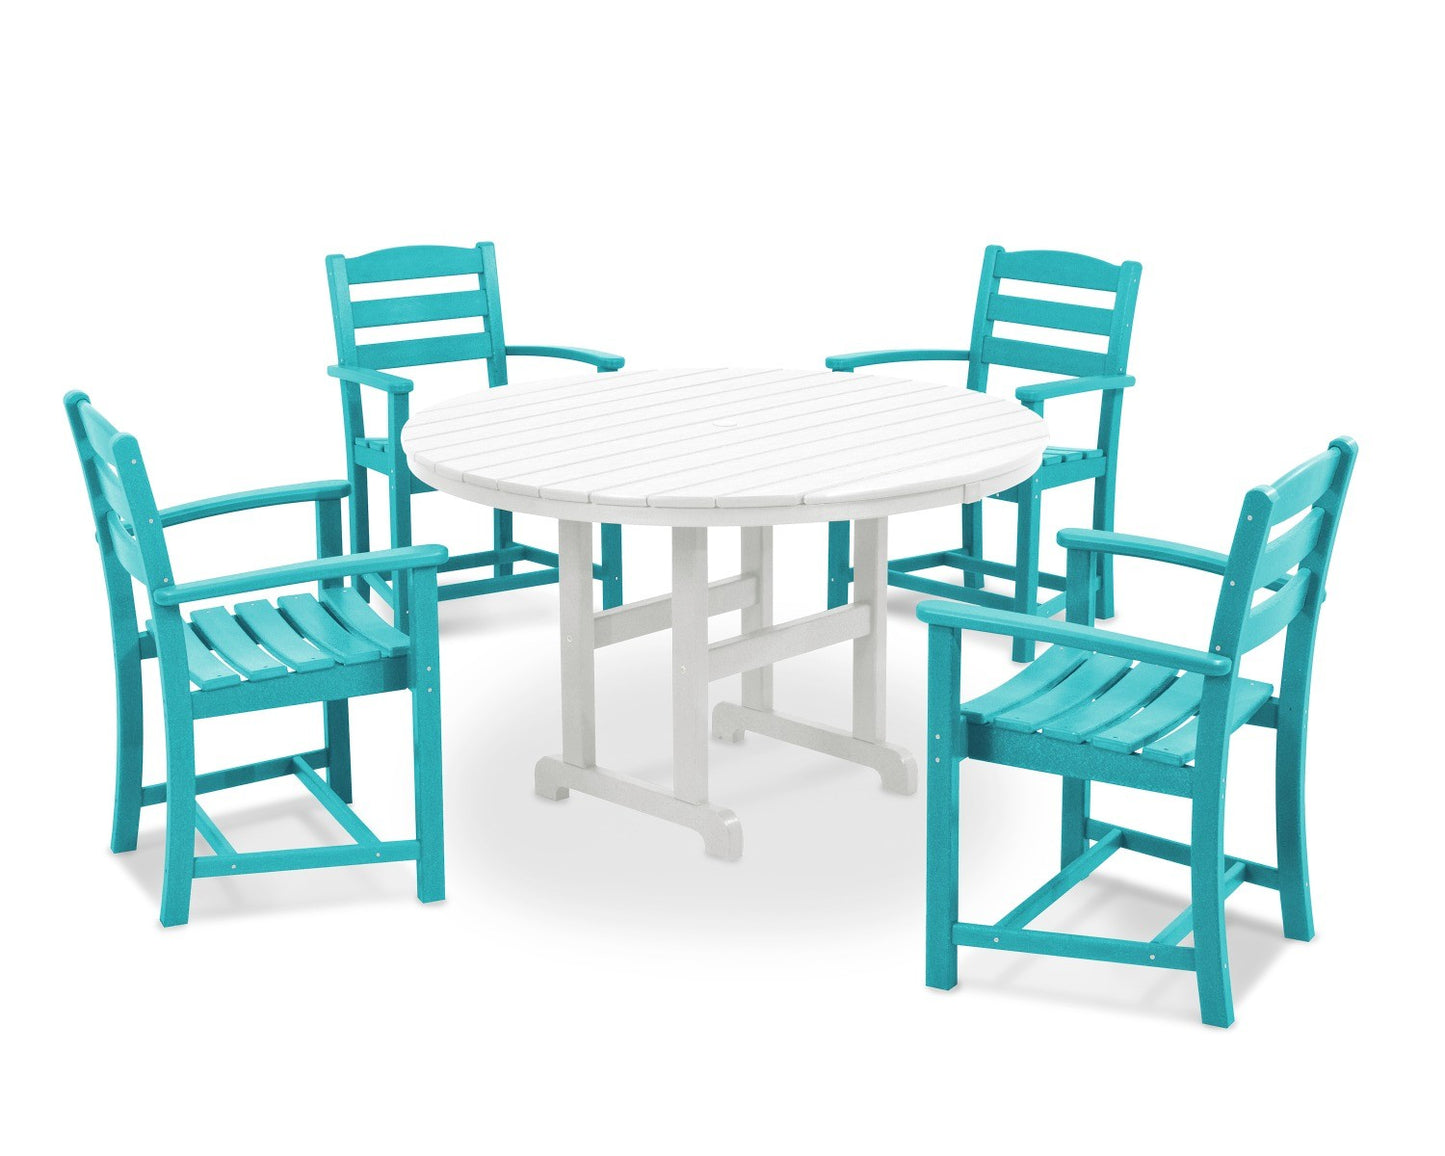 POLYWOOD La Casa Cafe 5-Piece Dining Set, Table & 4 Arm Chairs